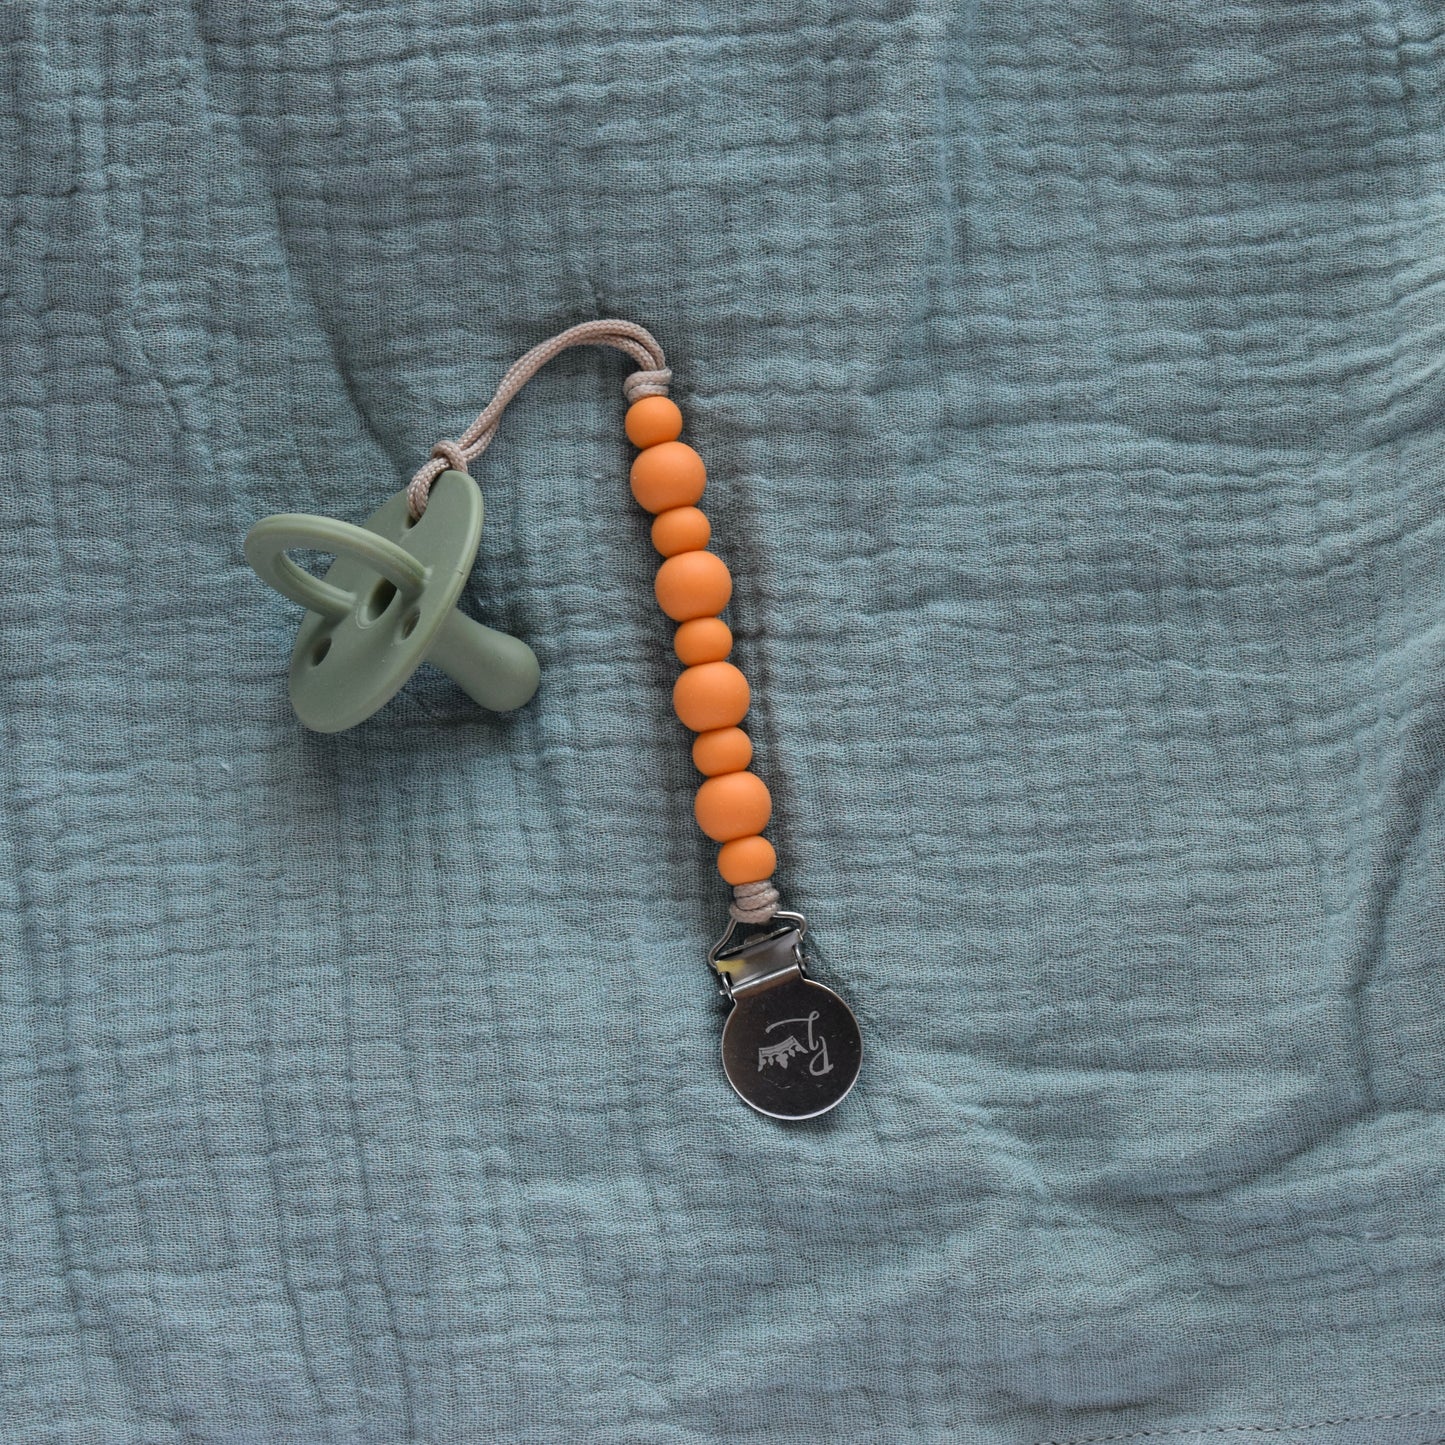 Madeline - Marigold Pacifier Clip